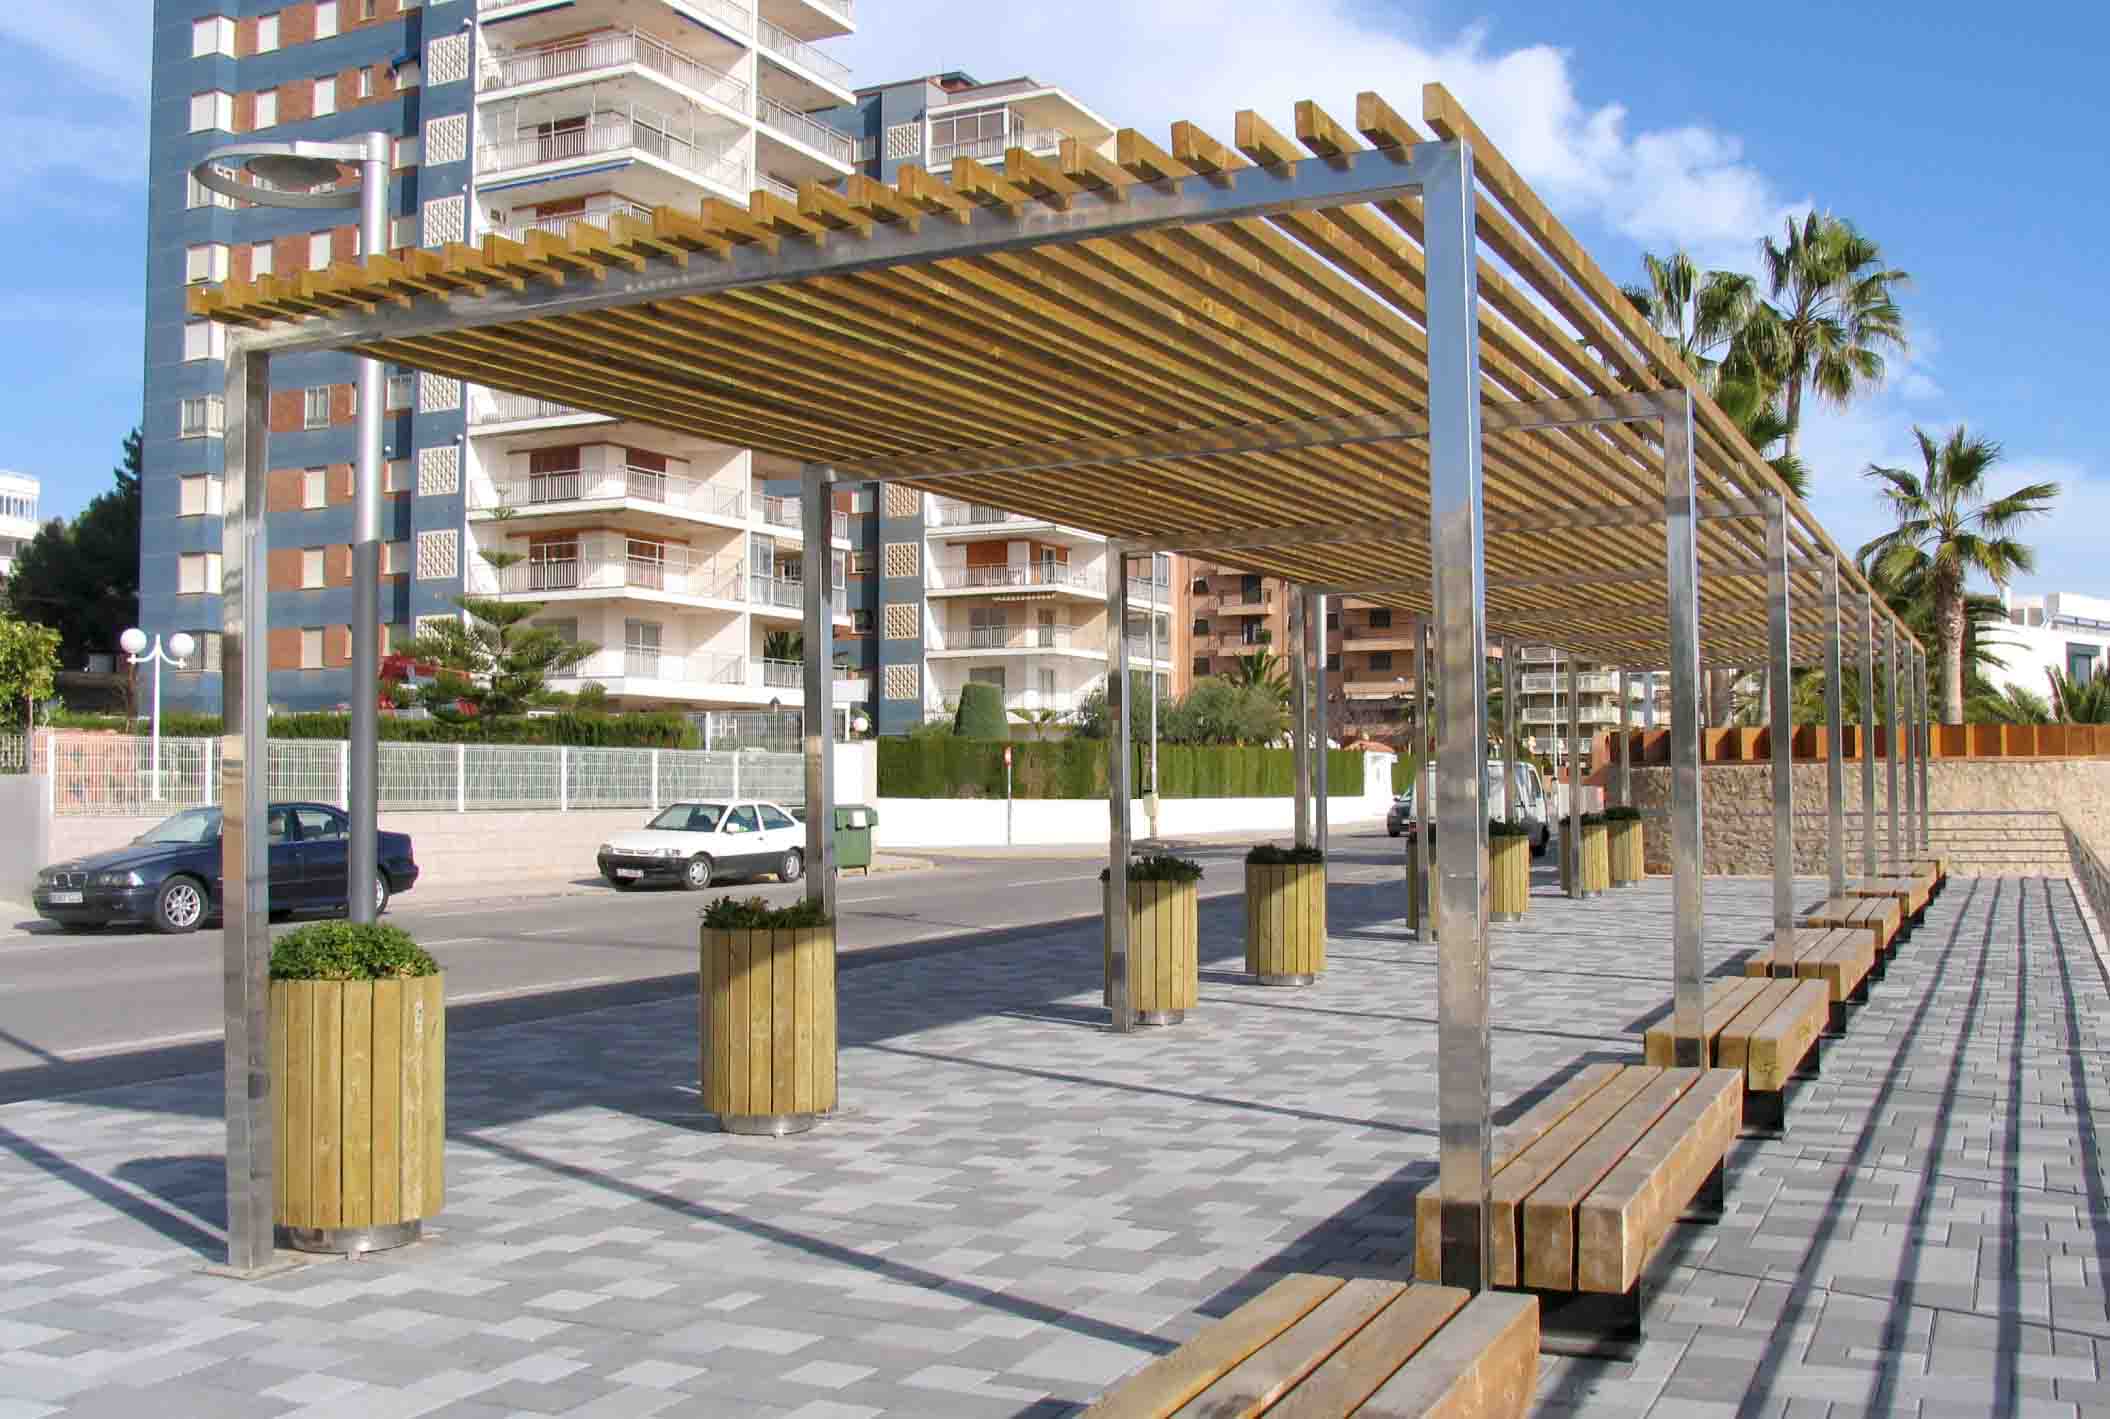 Pergola of wood and steel at a seafront